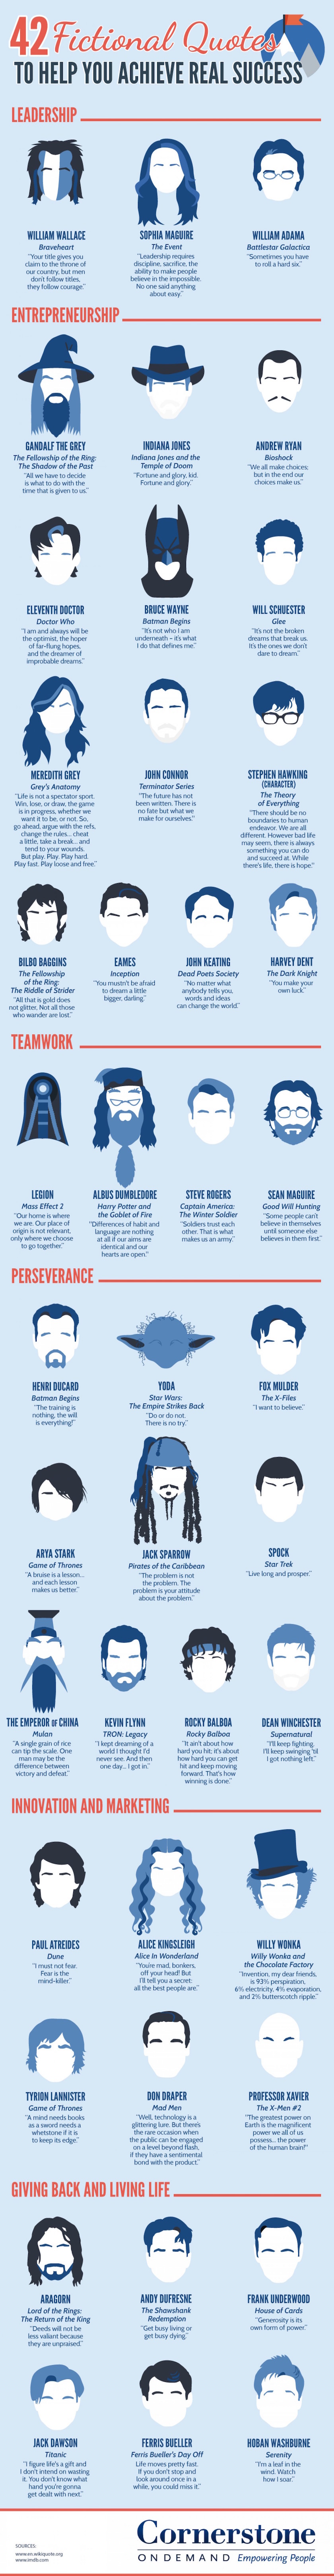 42 quotes for success from books, comics, and movies (infographic)